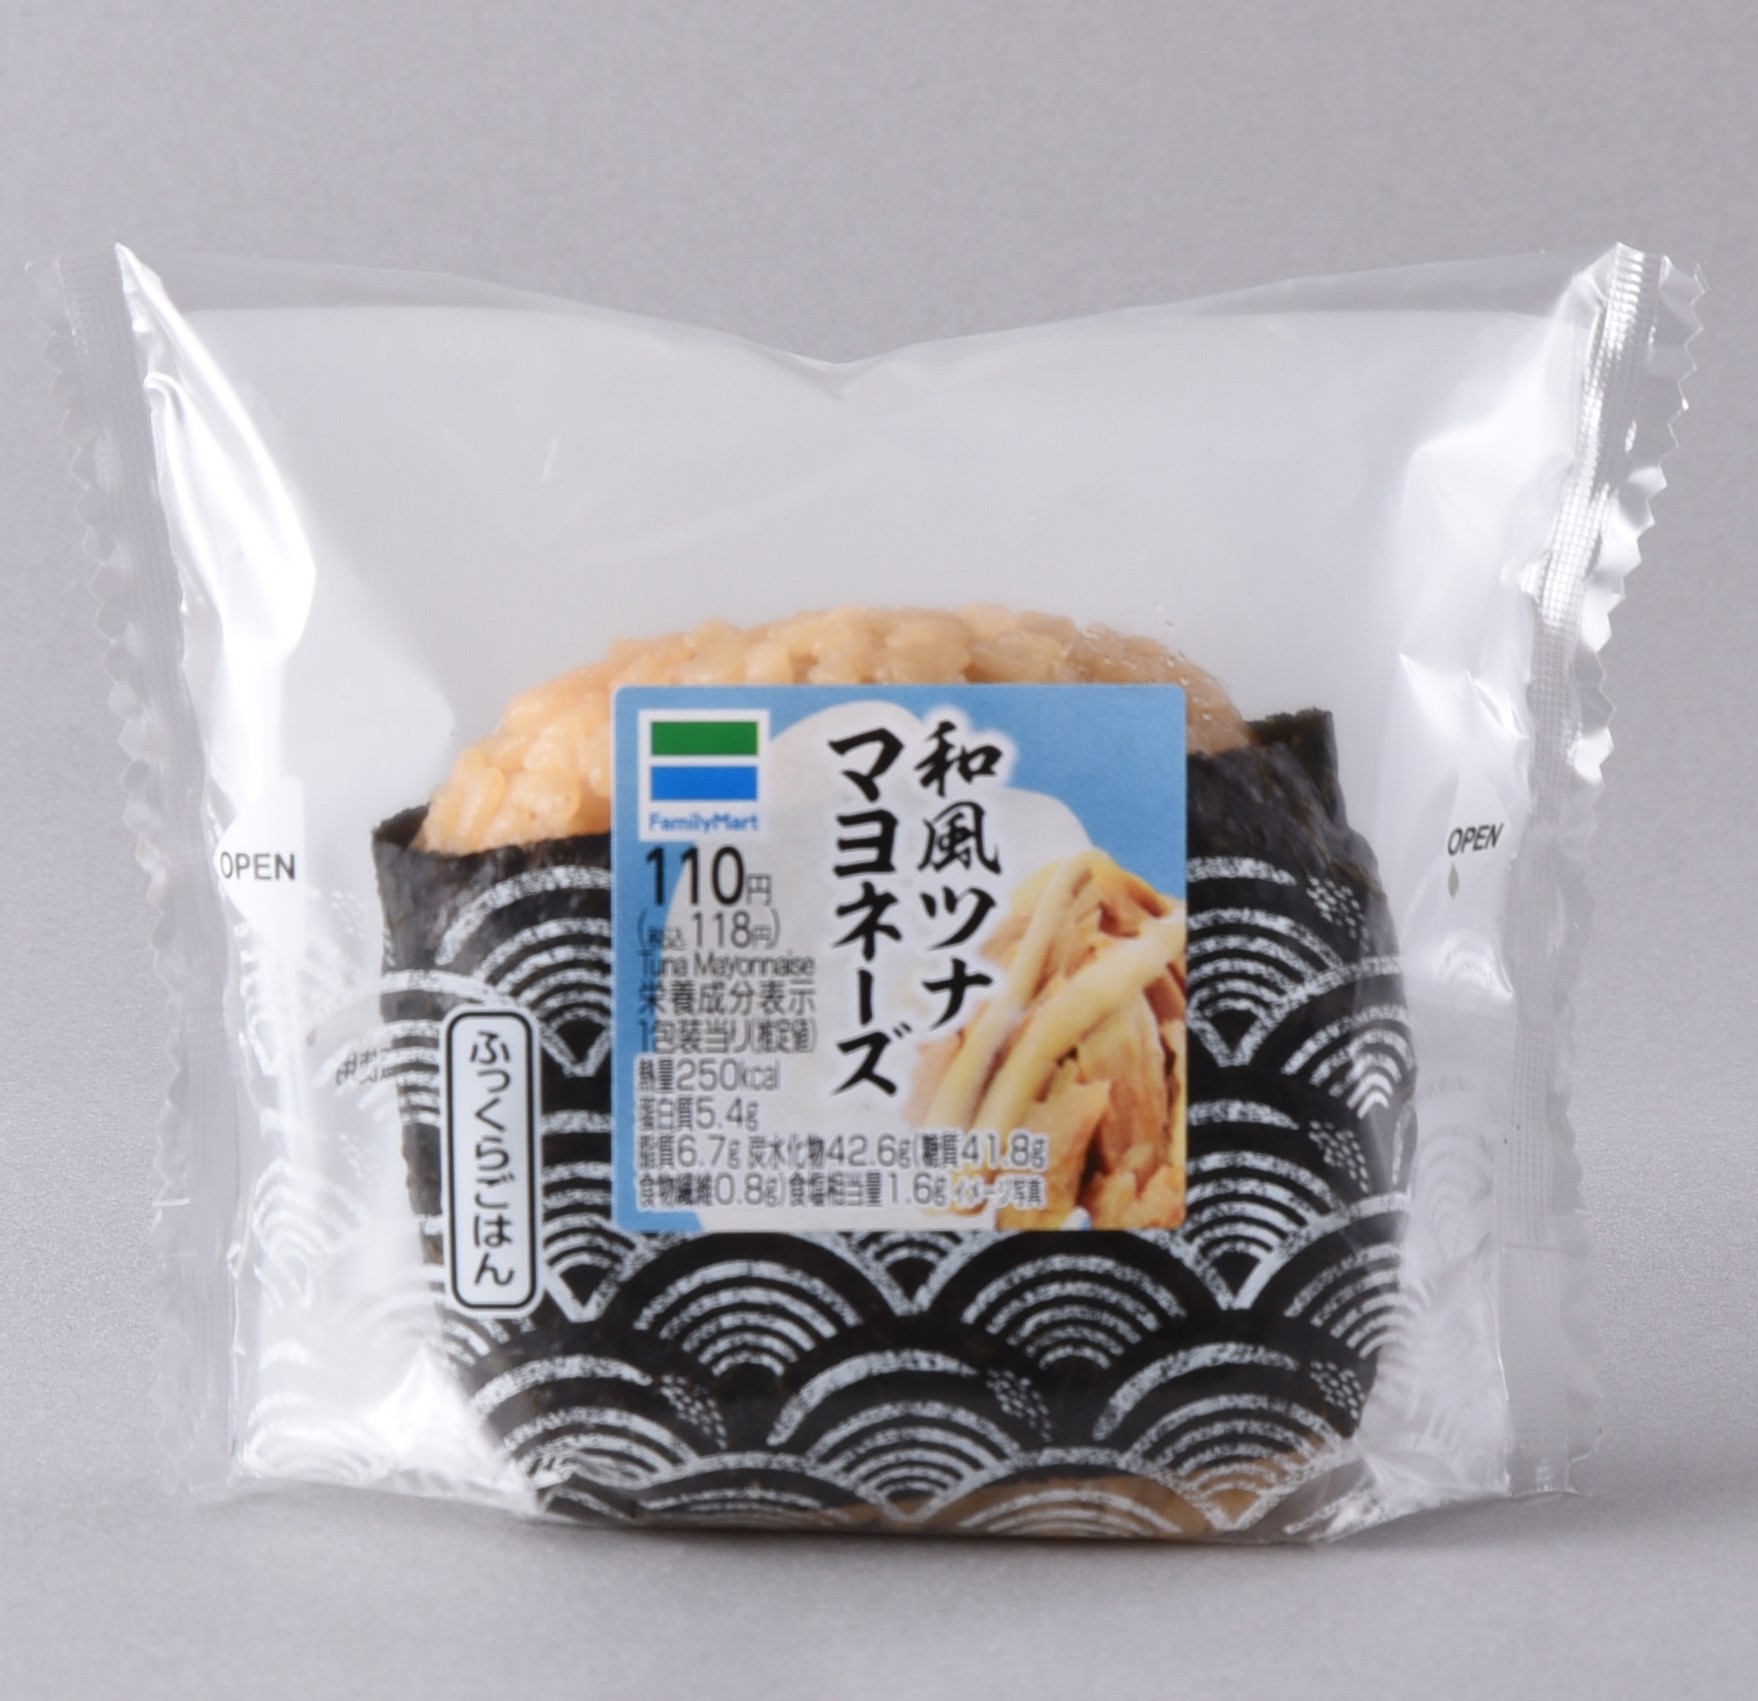 family-mart-to-celebrate-40th-birthday-by-introducing-onigiri-with-eco